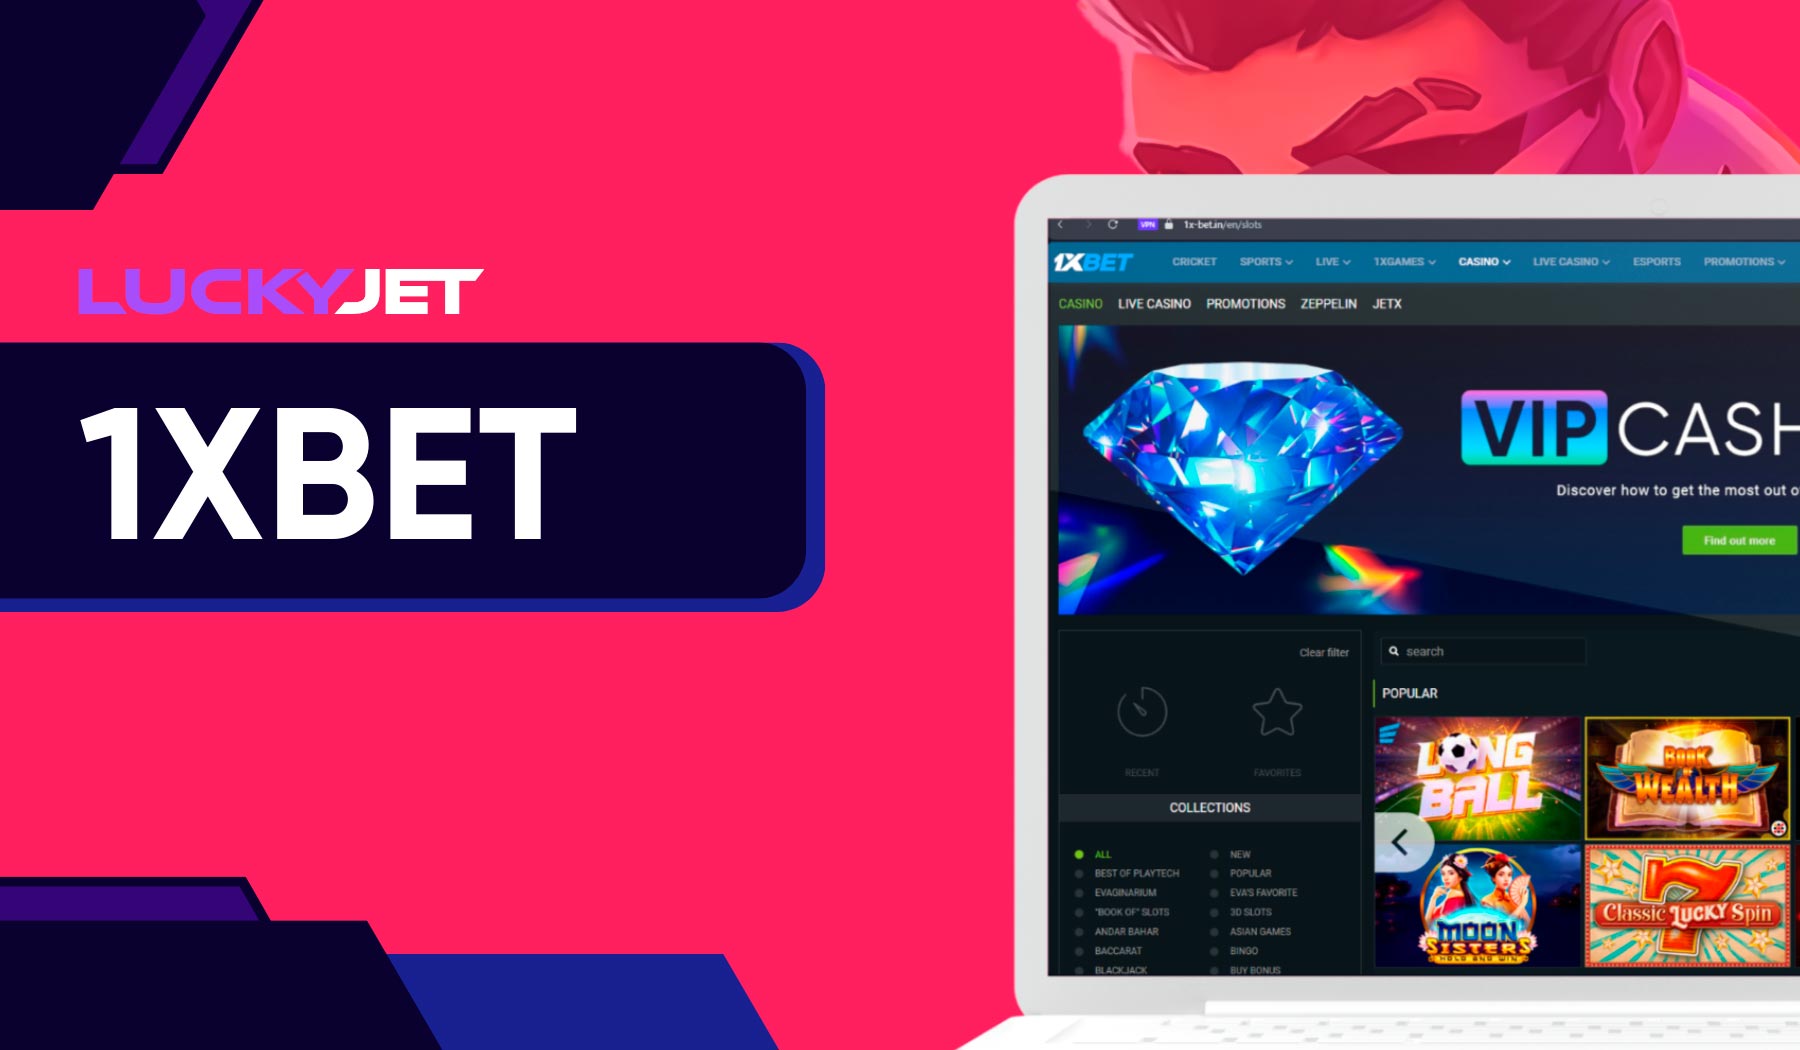 1xbet has launched the Lucky Jet